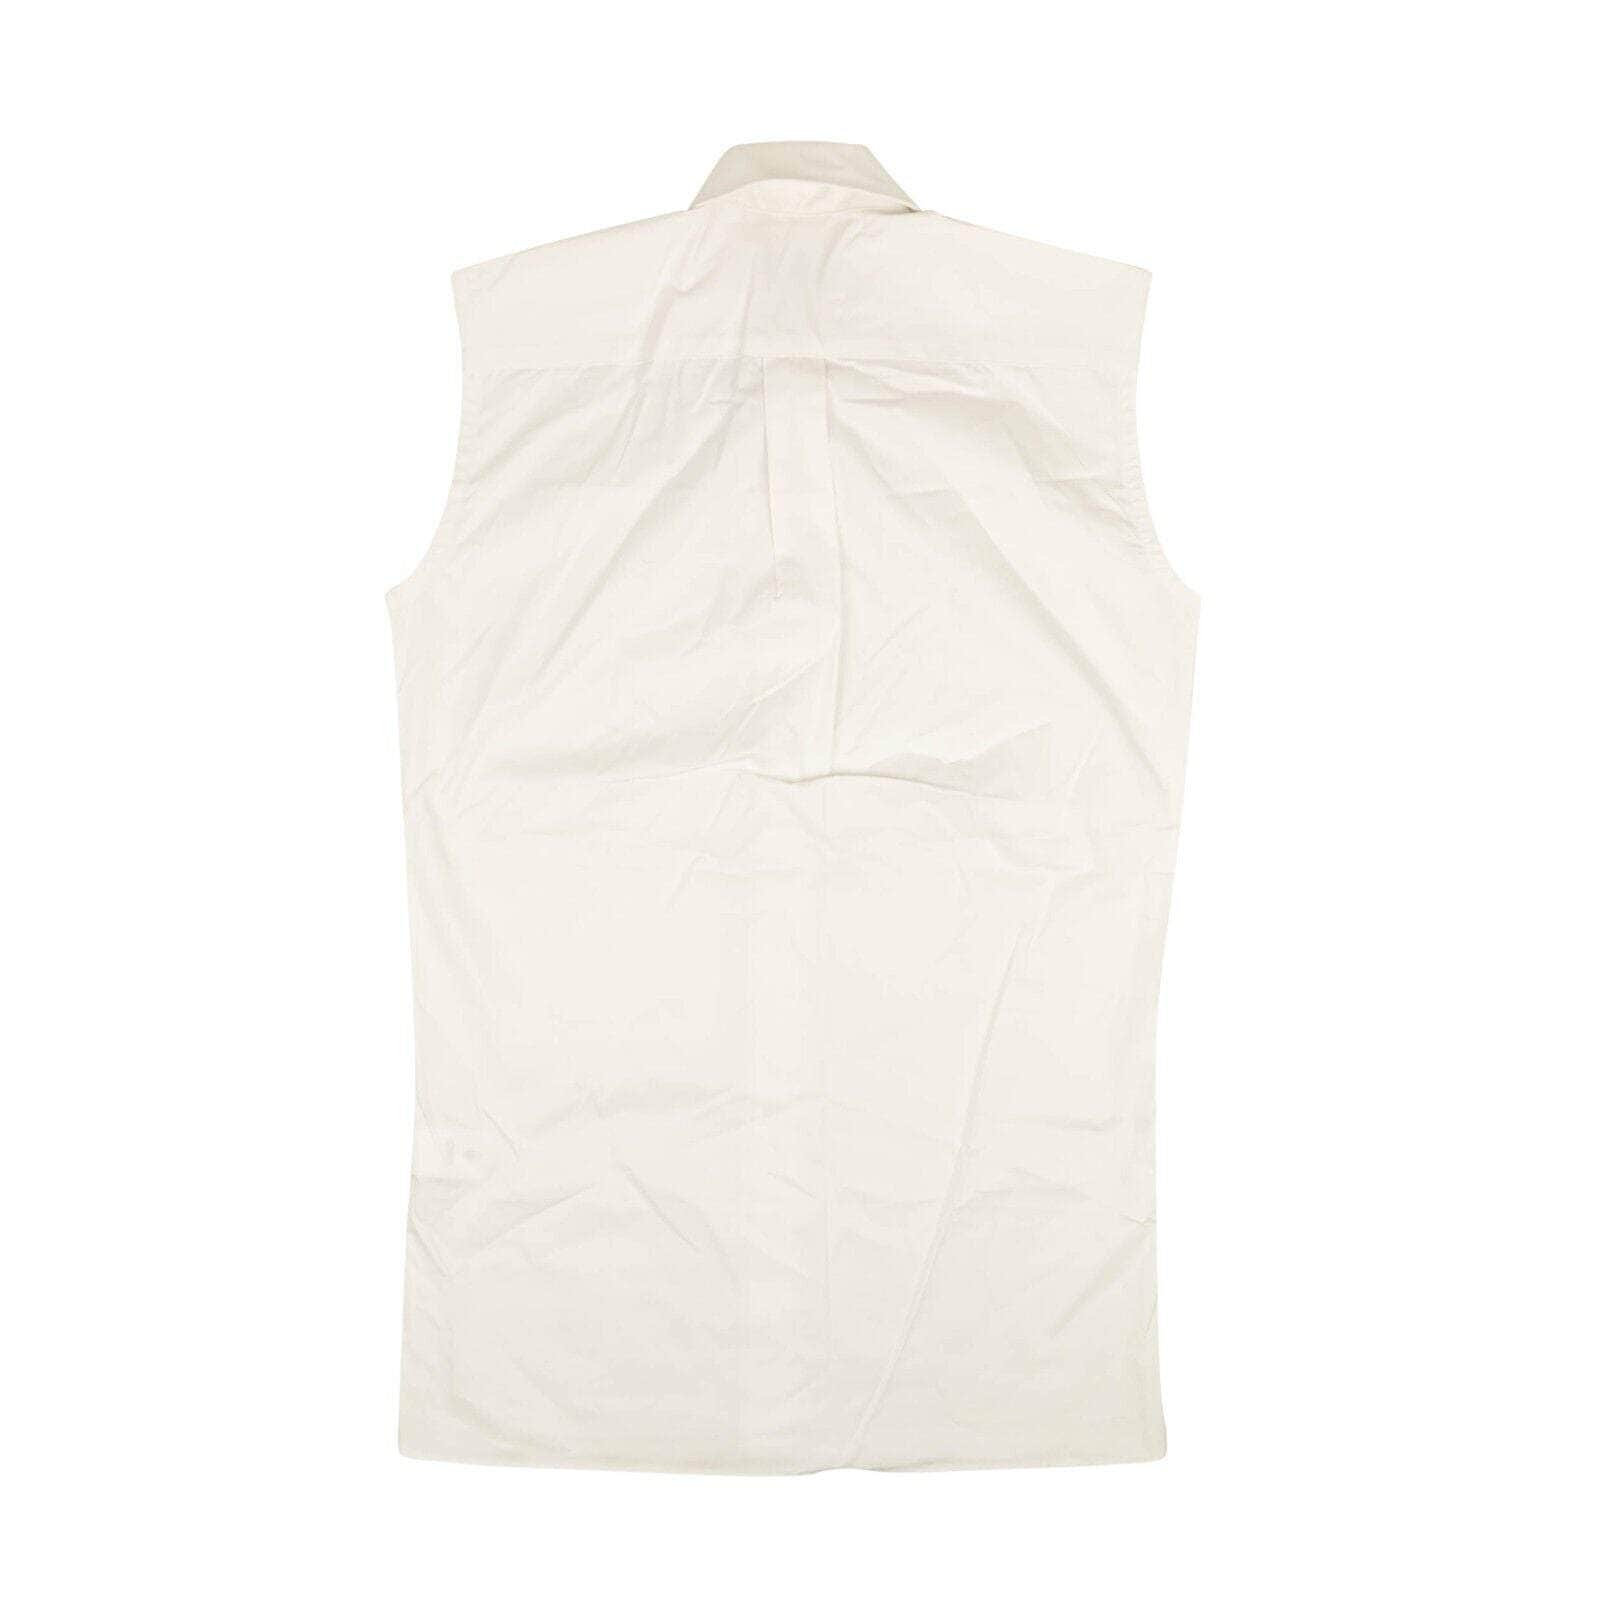 Xander Zhou channelenable-all, chicmi, couponcollection, gender-mens, main-clothing, mens-shoes, size-46, size-48, size-50, under-250, xander-zhou 46 / SH06-1 White Sleeveless Button Down Shirt 95-XZO-1005/46 95-XZO-1005/46